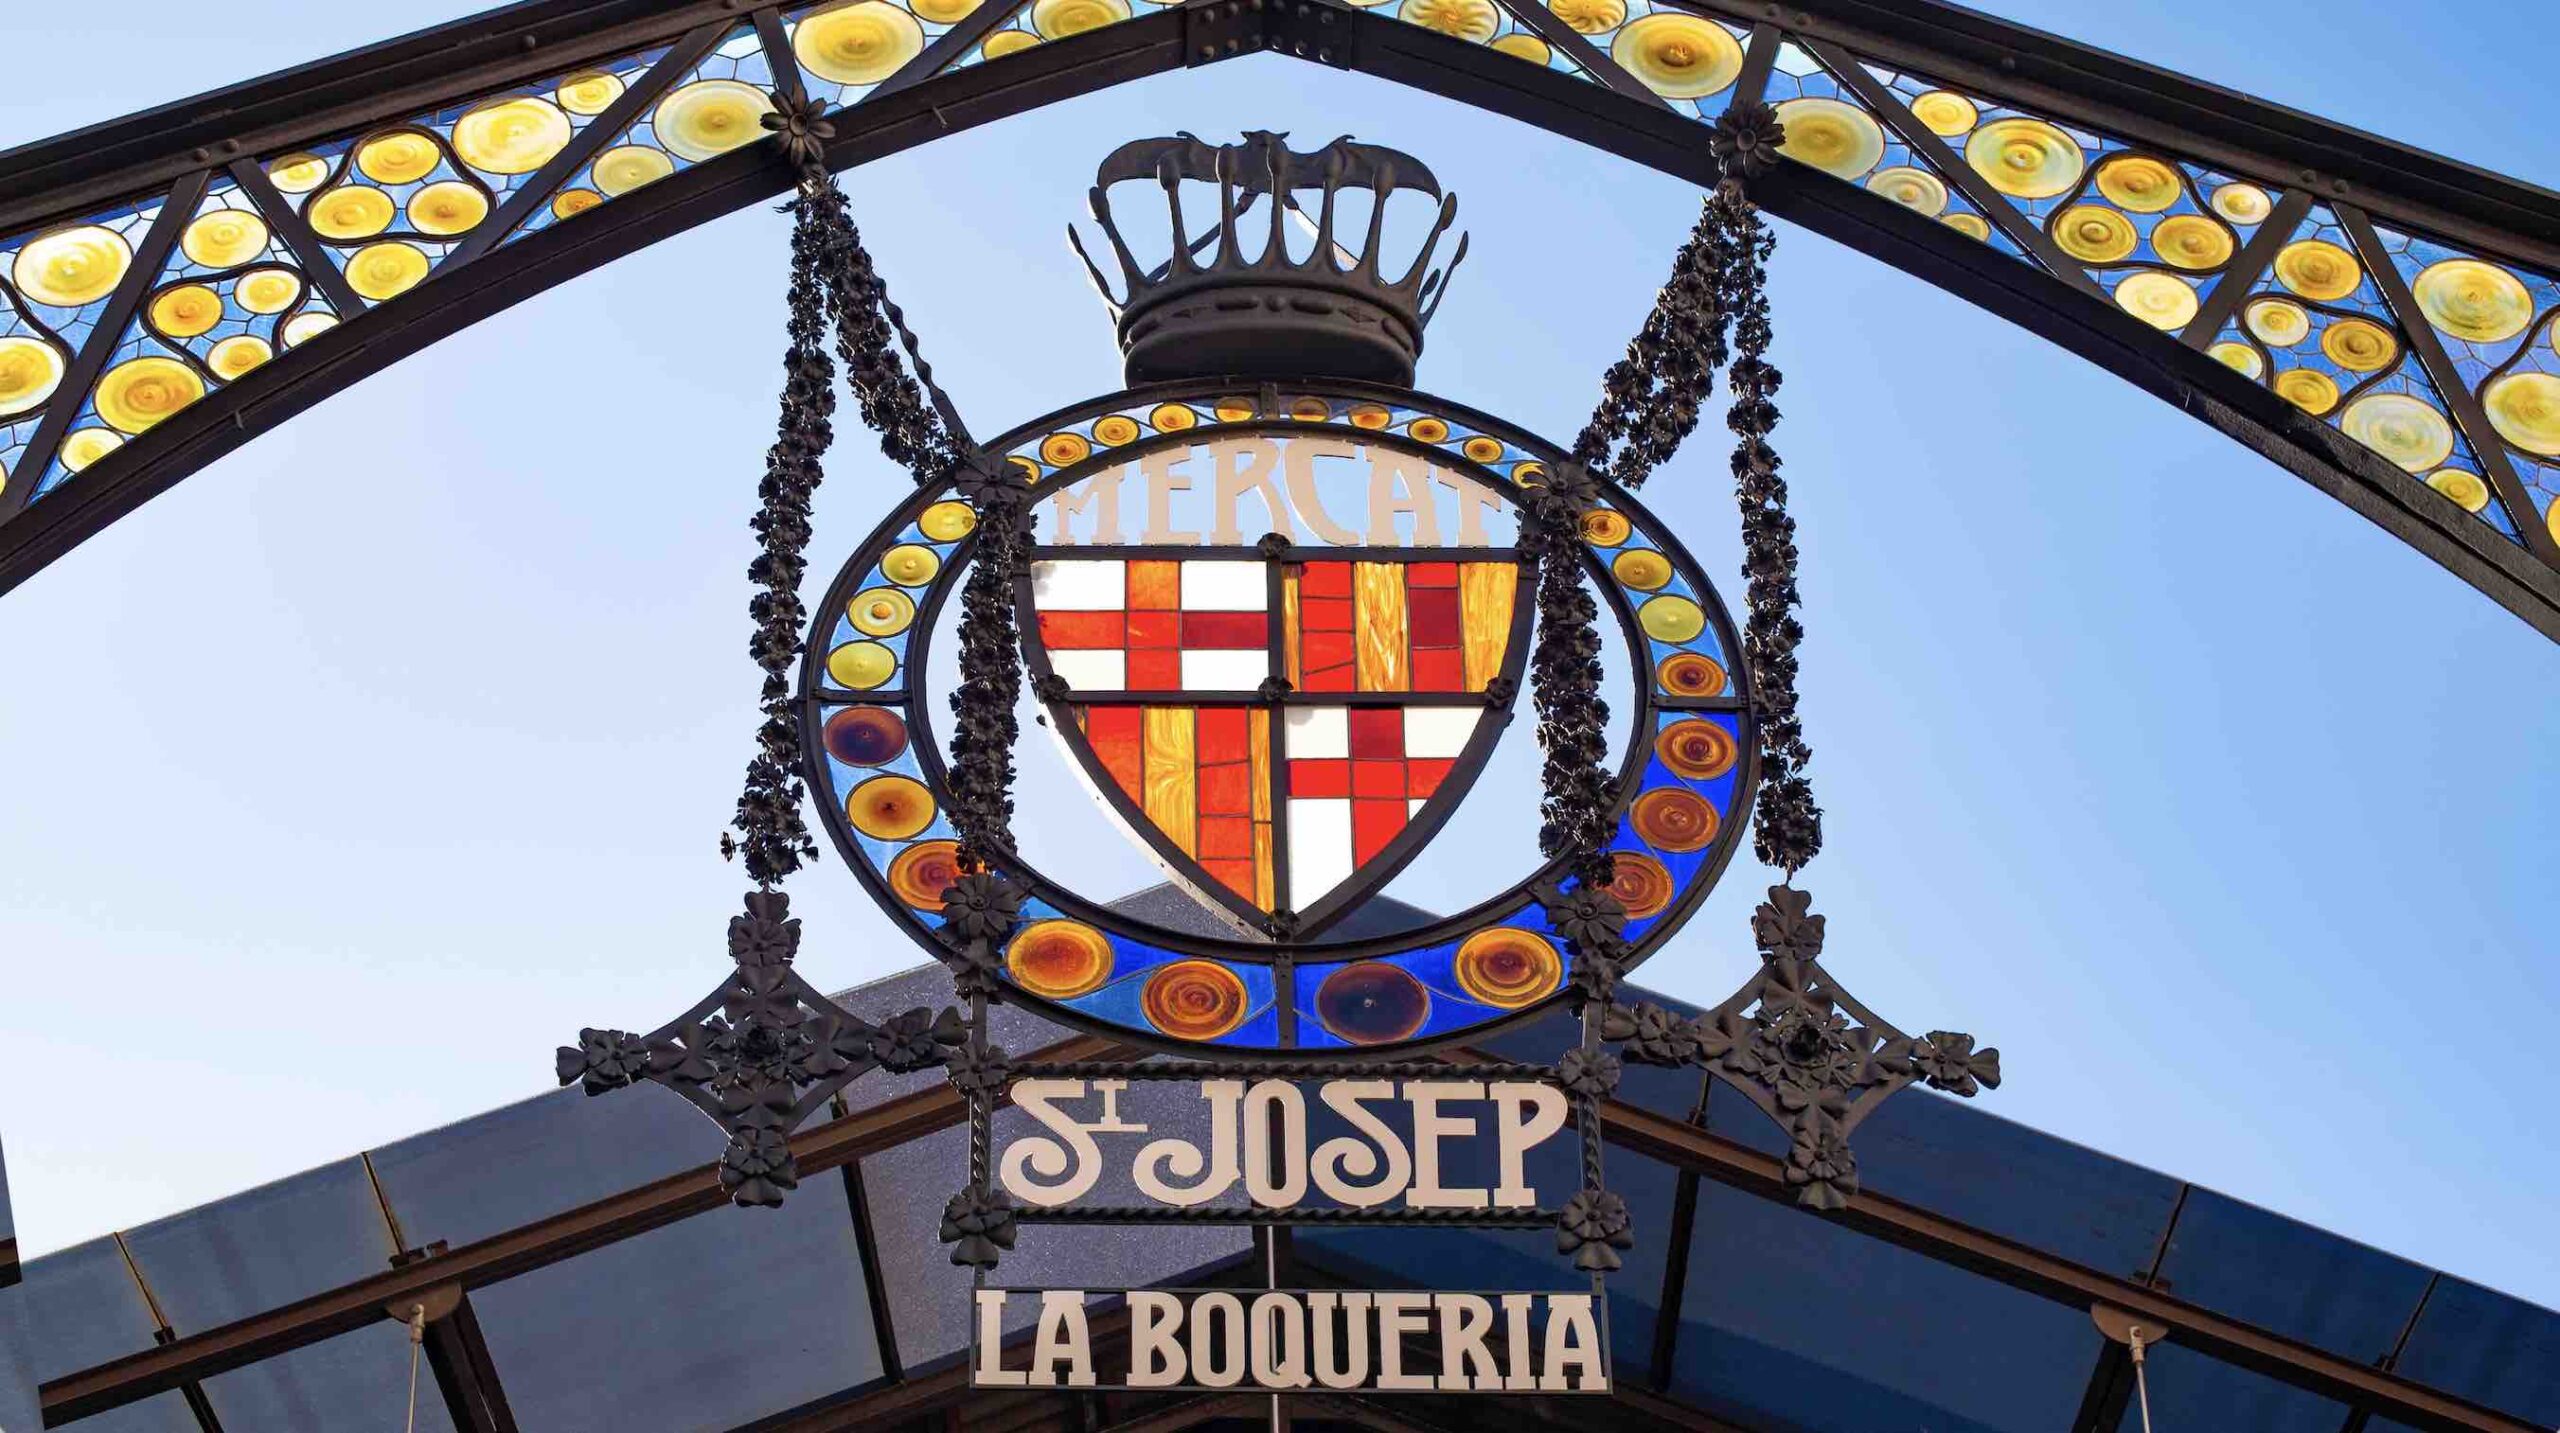 A visit to Mercat de la Boqueria is one of the best tings to do in Barcelona